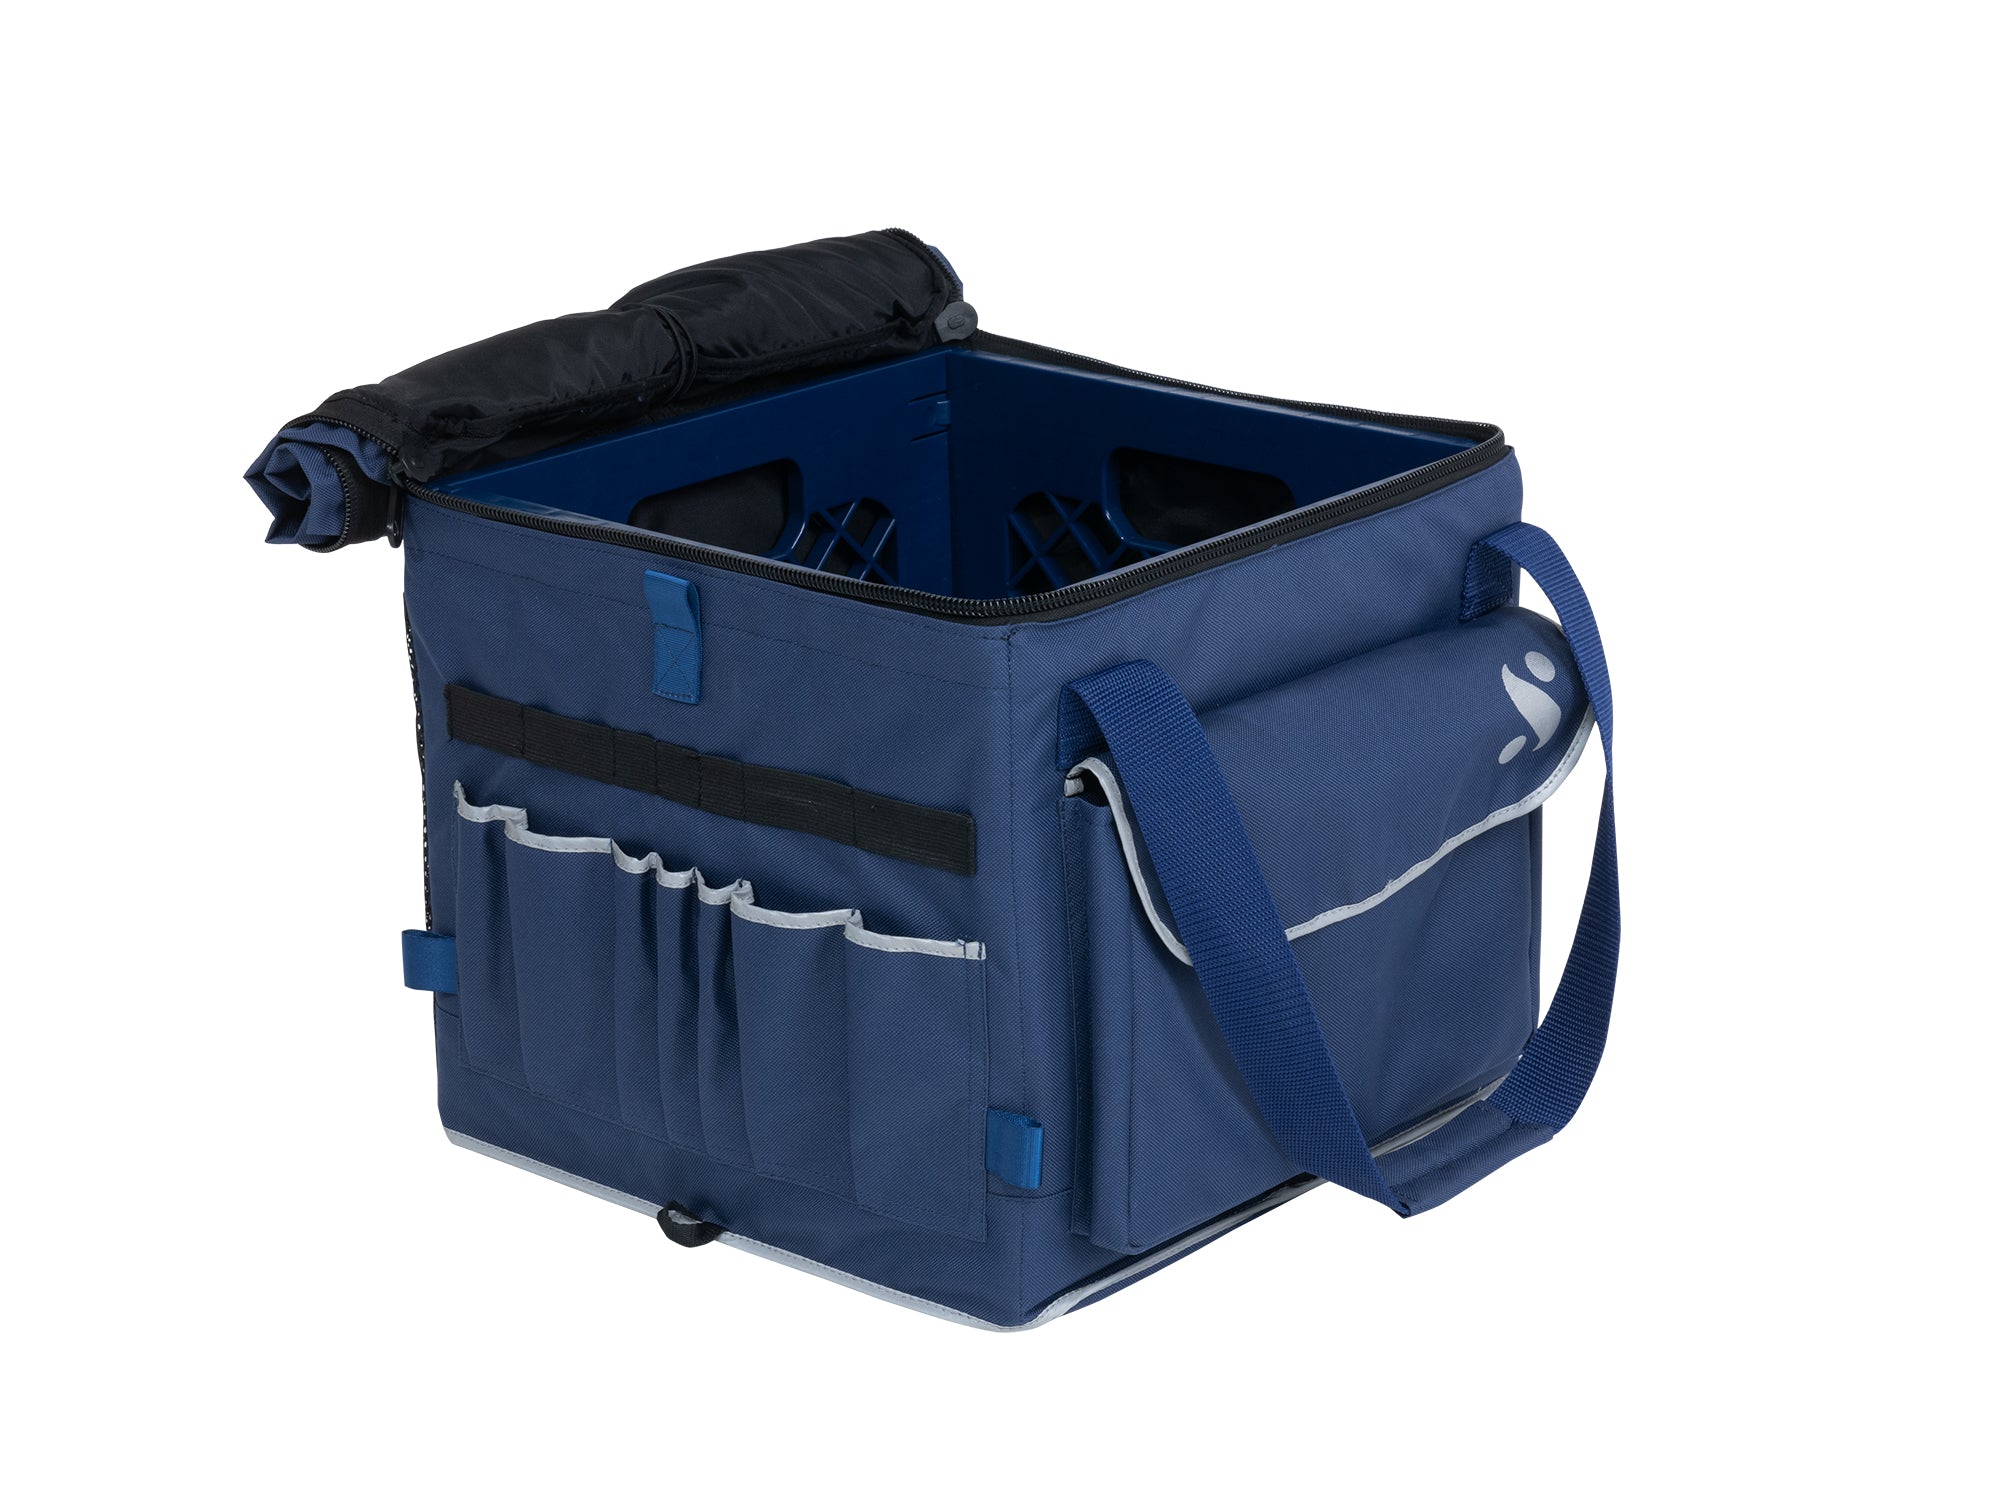 Harbor Folding Fishing Crate with Lid Open